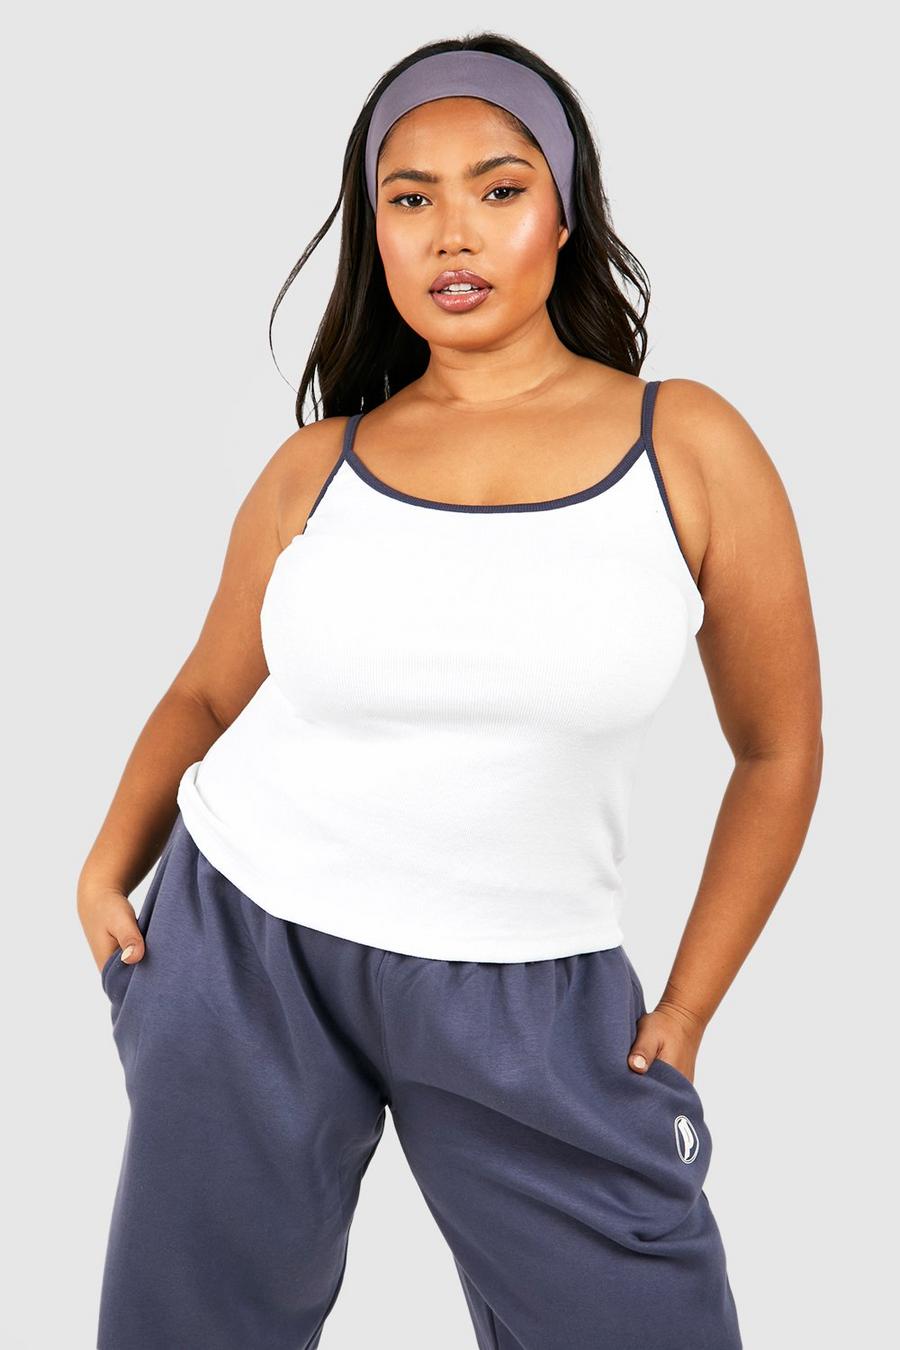 Binding for Plus Size Babes 